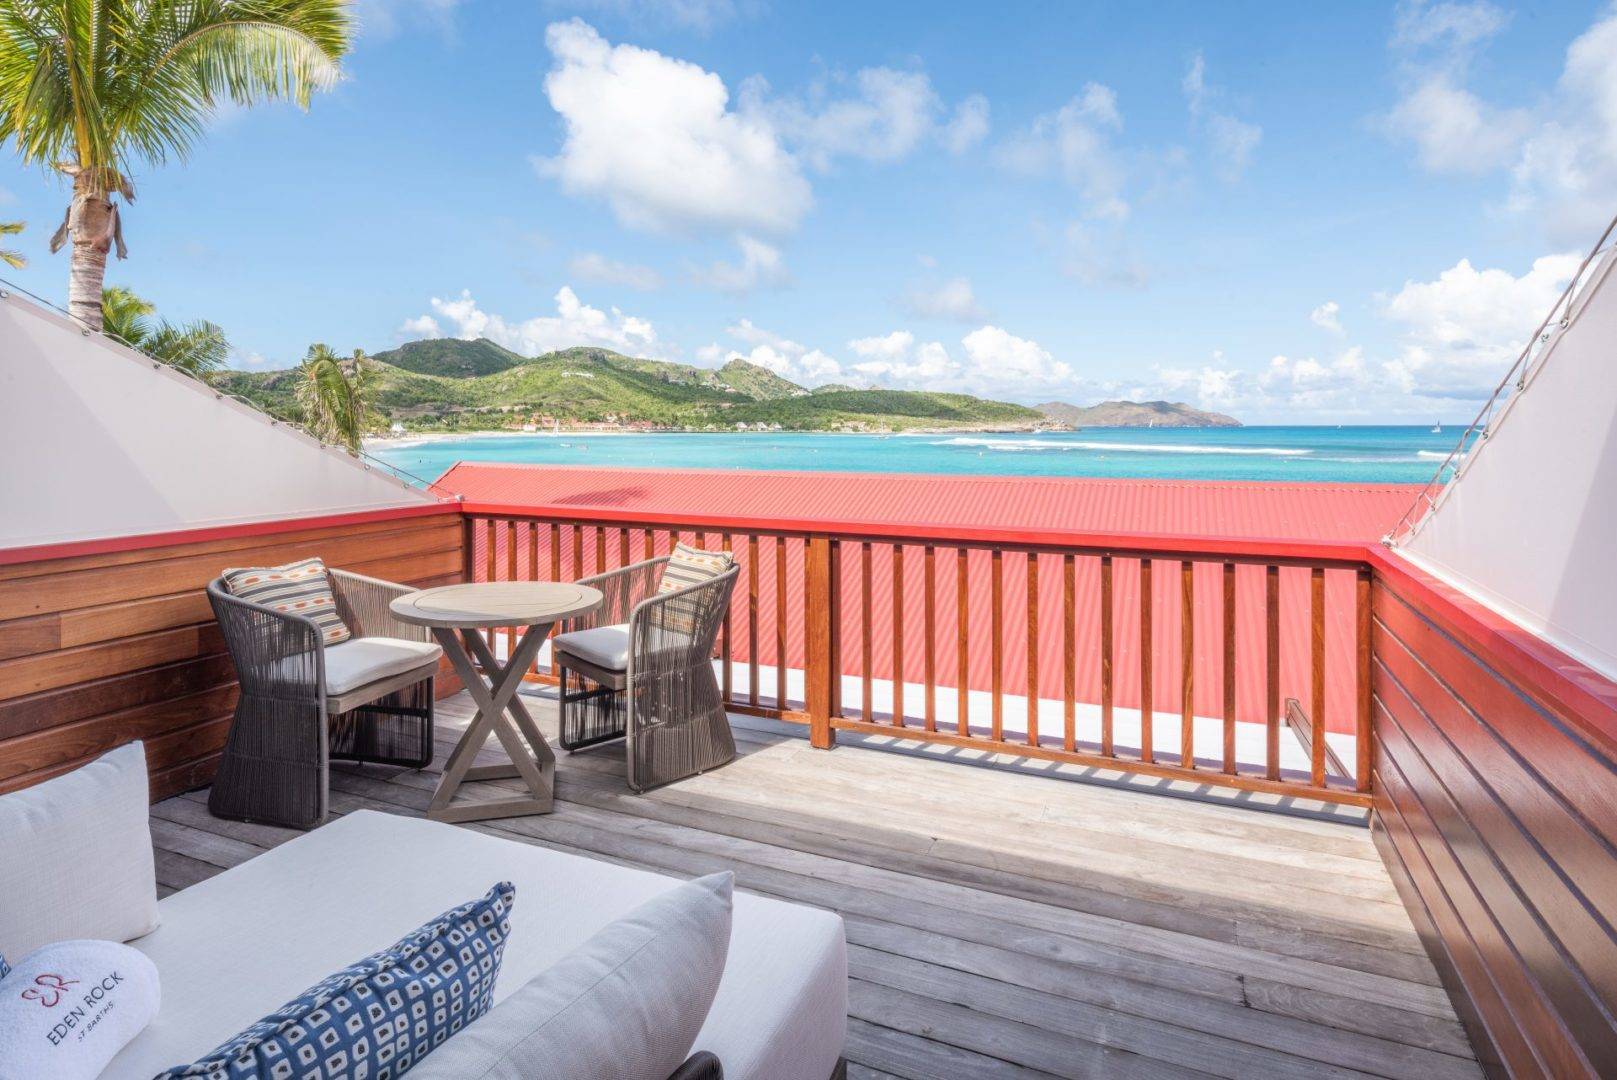 Eden Rock - St Barths- Deluxe St Jean, St Barthelemy Hotels- GDS  Reservation Codes: Travel Weekly